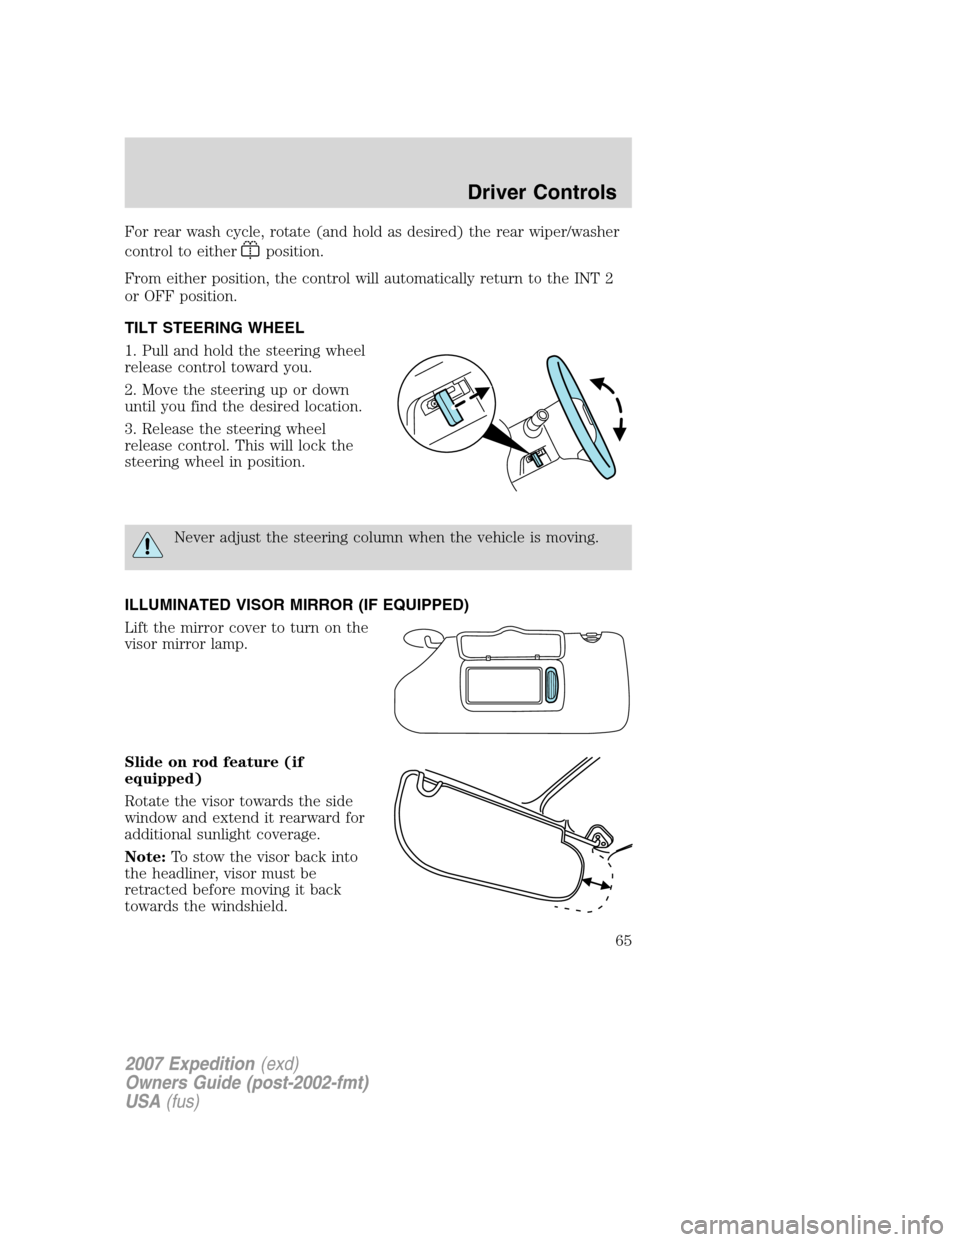 FORD EXPEDITION 2007 3.G Owners Manual For rear wash cycle, rotate (and hold as desired) the rear wiper/washer
control to either
position.
From either position, the control will automatically return to the INT 2
or OFF position.
TILT STEER